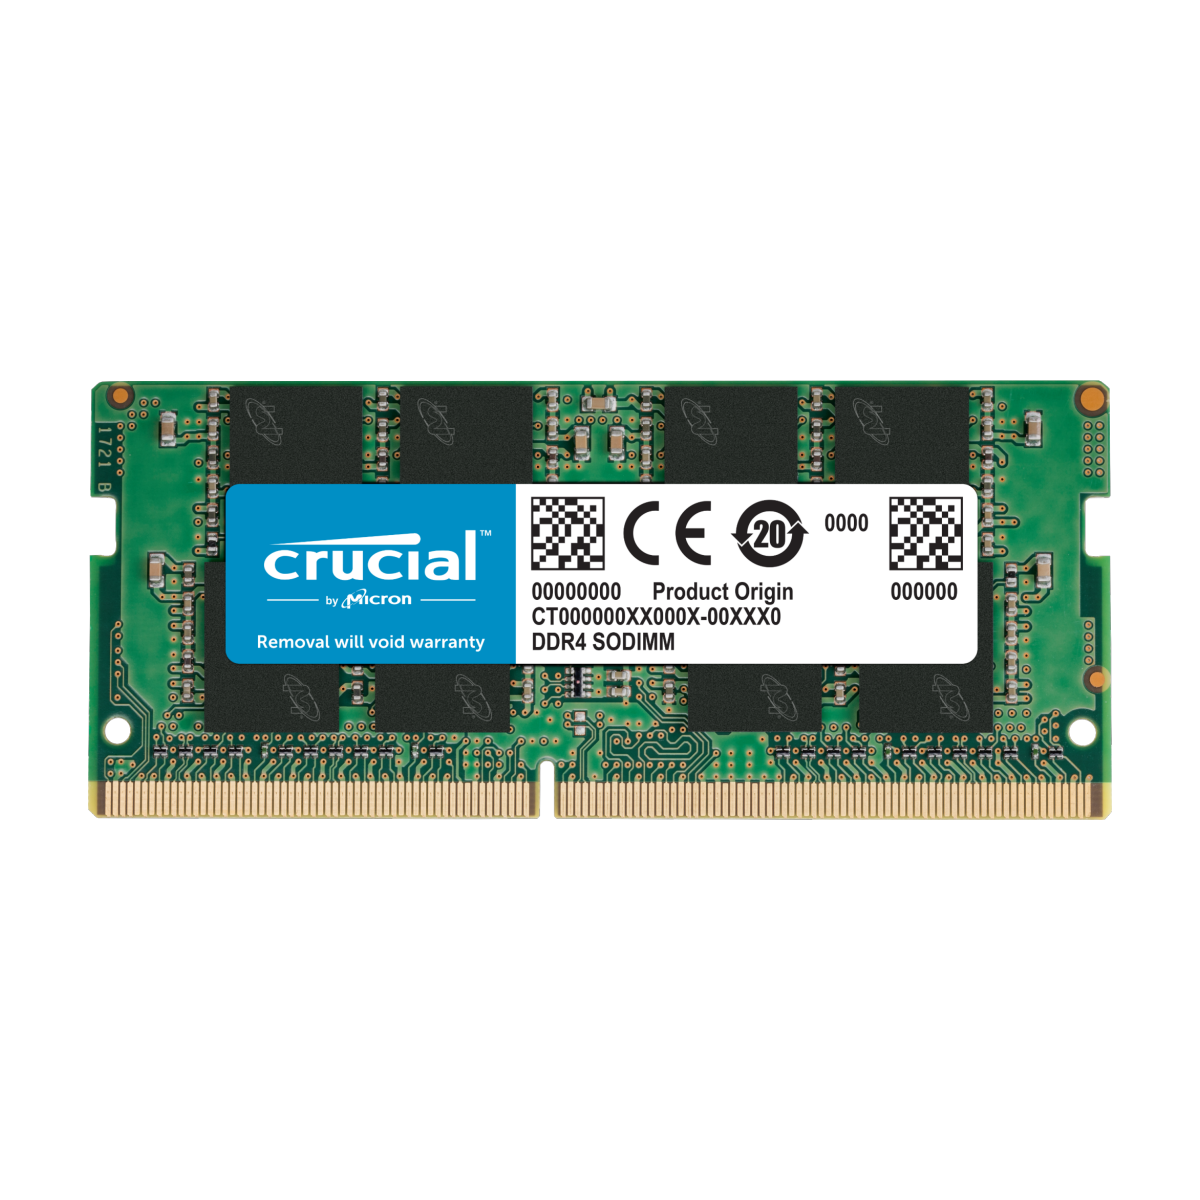 Memorie notebook DDR4 16GB 2133 MHz Crucial - second hand